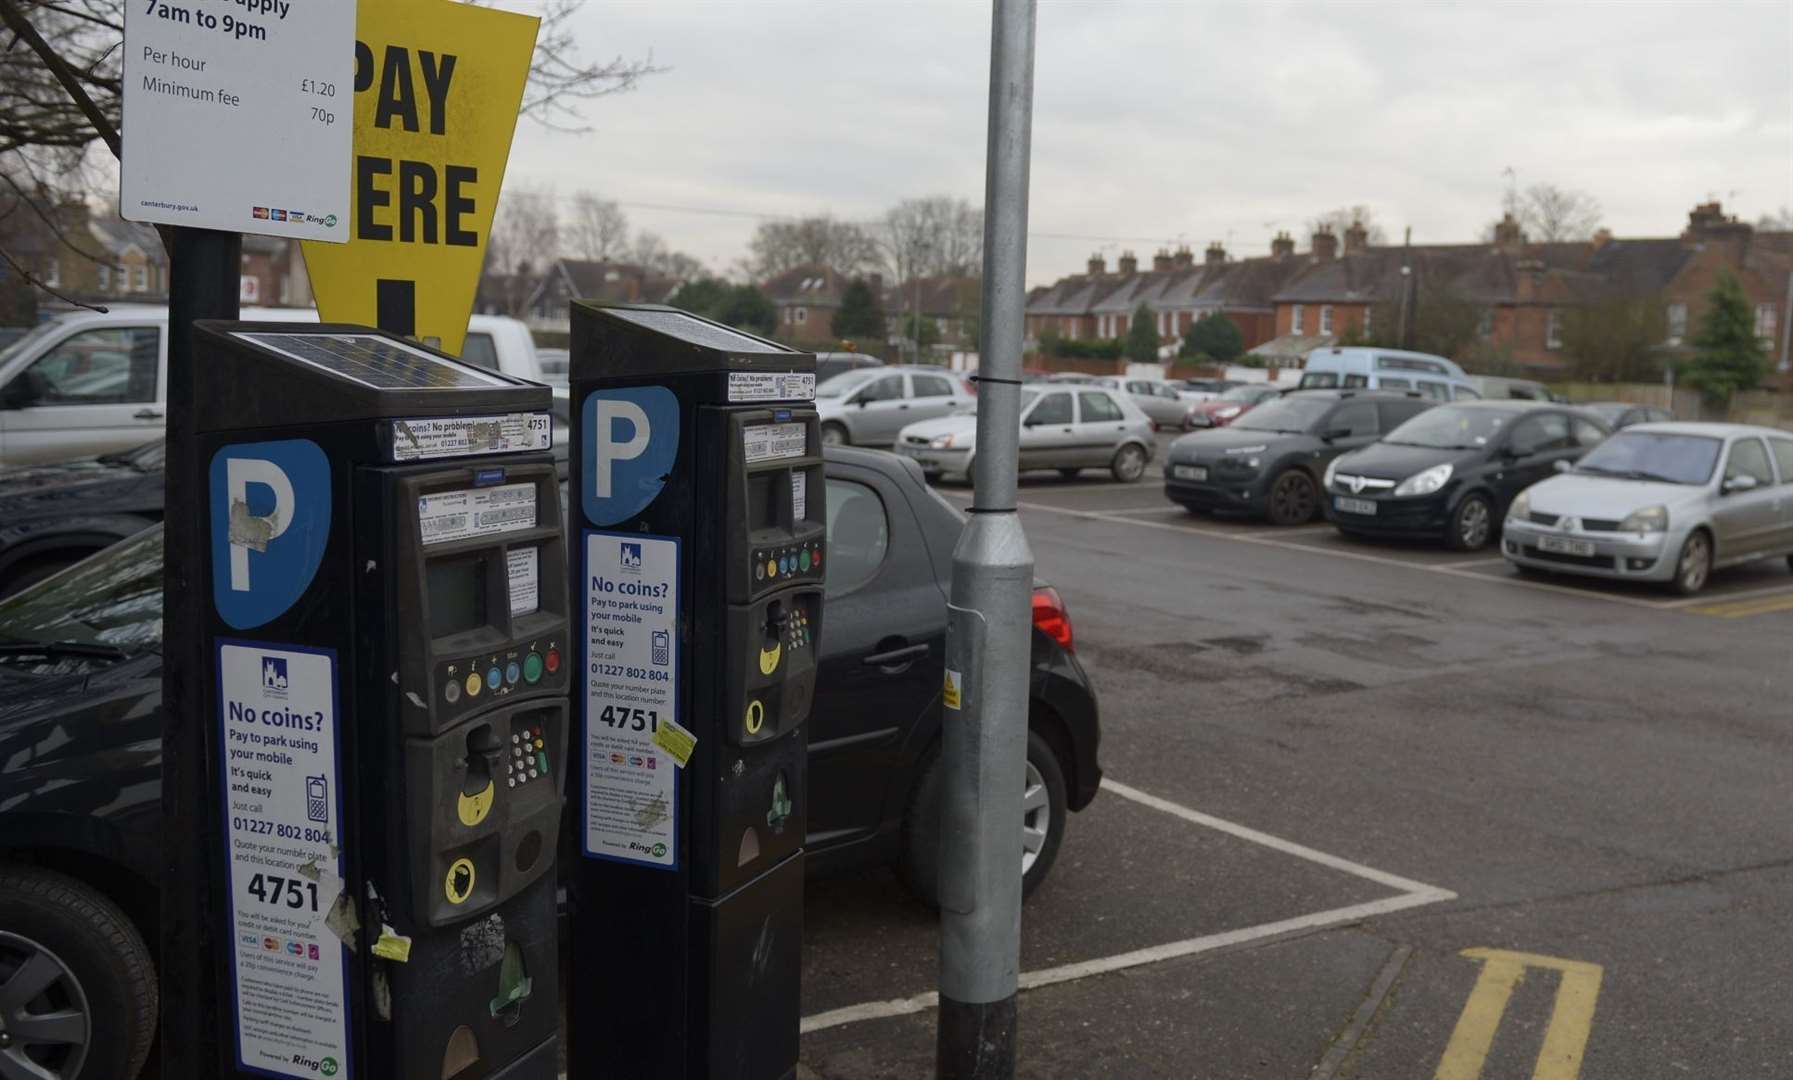 Parking charges have been hiked by many authorities as they look to generate revenues. Picture: Barry Goodwin